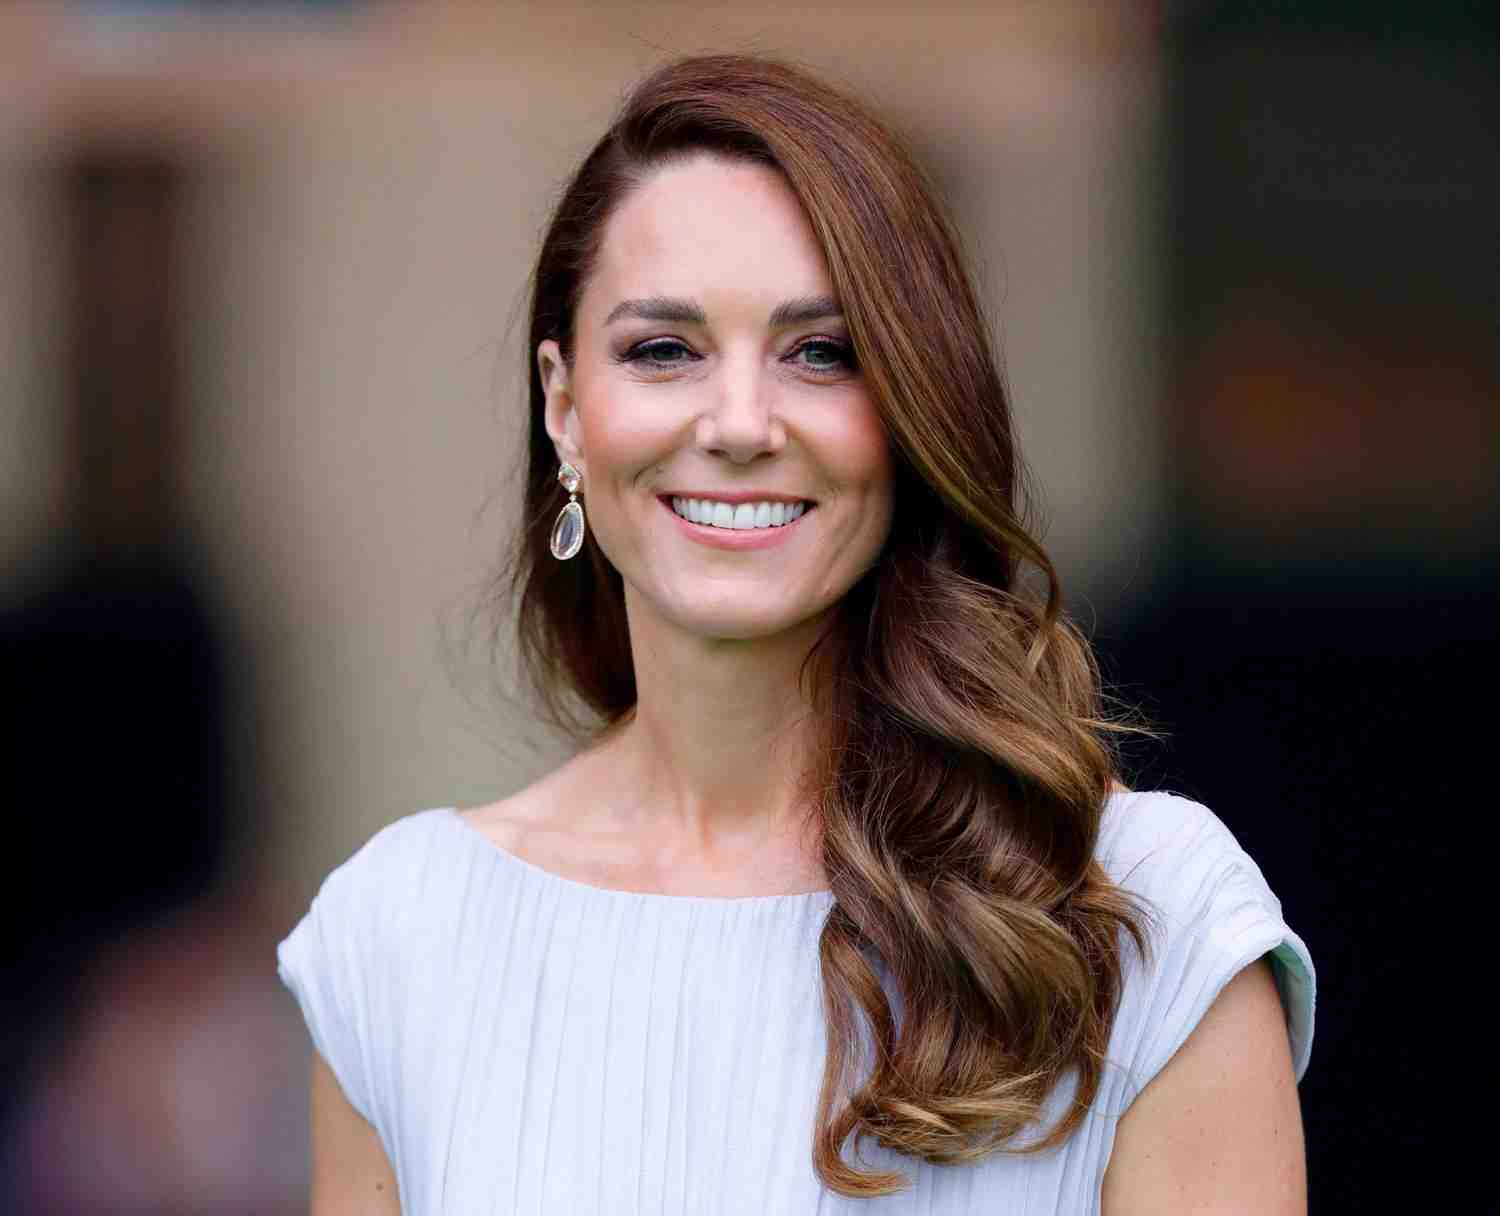 Delving into the 'Kate Middleton cancer' chitchat? Fear not, we've got you. From royal whispers to tabloid triumphs, get the latest on this unfolding drama here.